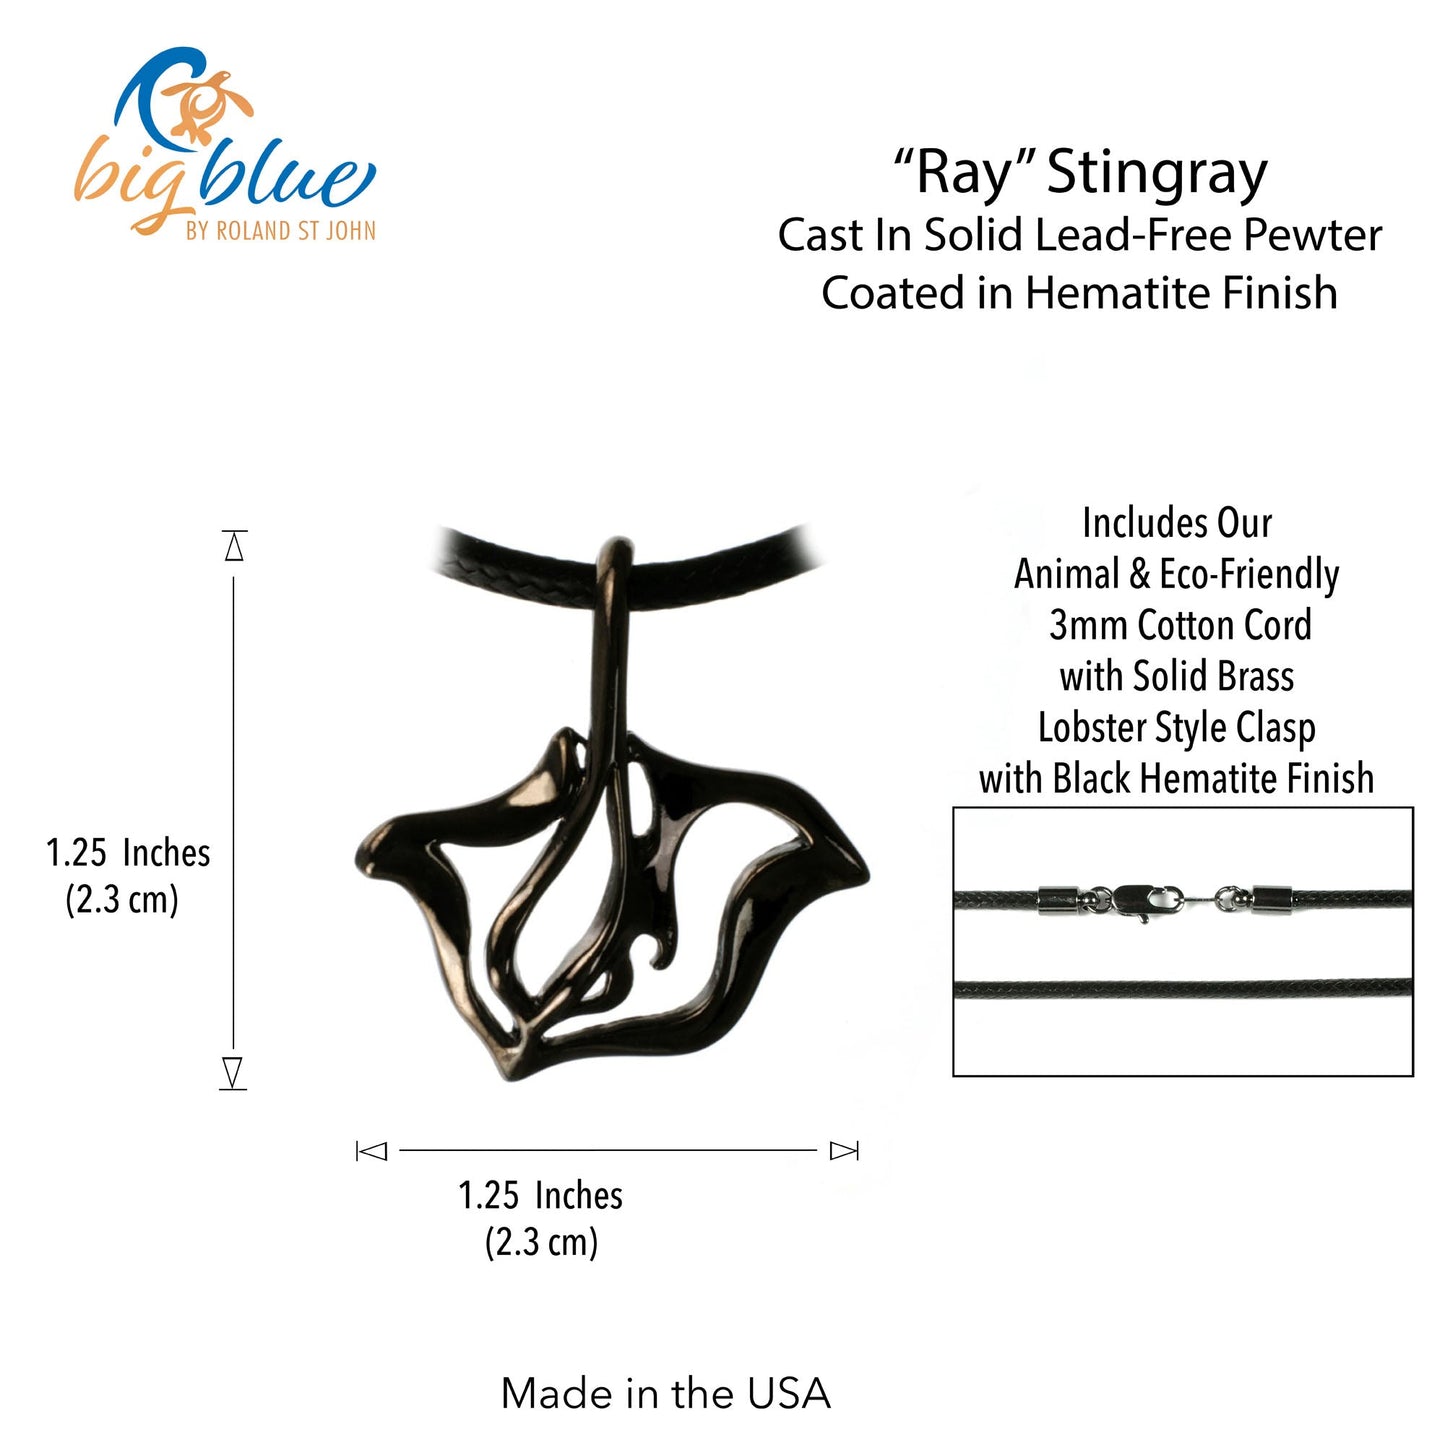 Stingray Necklace for Men and Women Hematite - Manta Ray Gift for Women and Men, Stingray Necklace Jet Black, Gifts for Divers, Hematite Jewelry - The Tool Store